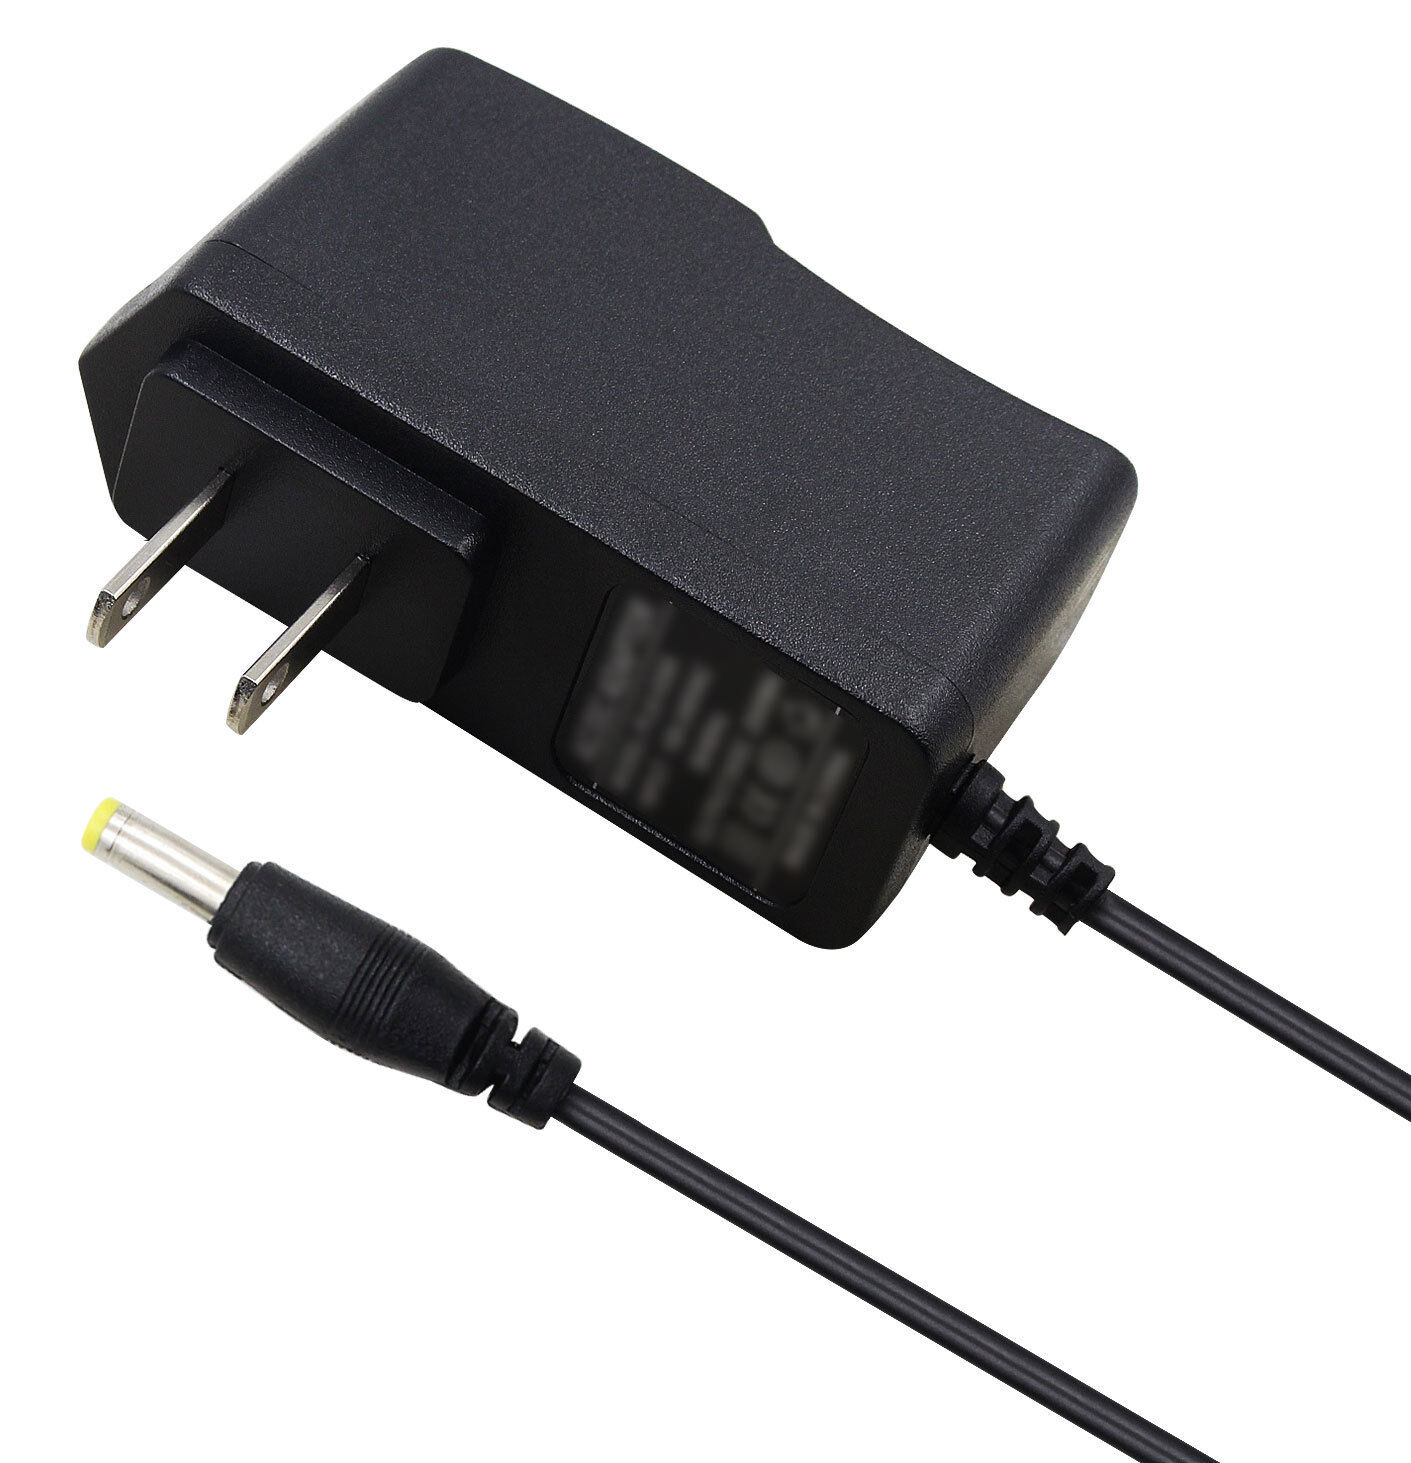 thinkstar Us Wall Power Adapter Charger For Sony Playstation Portable Psp-3004 Console